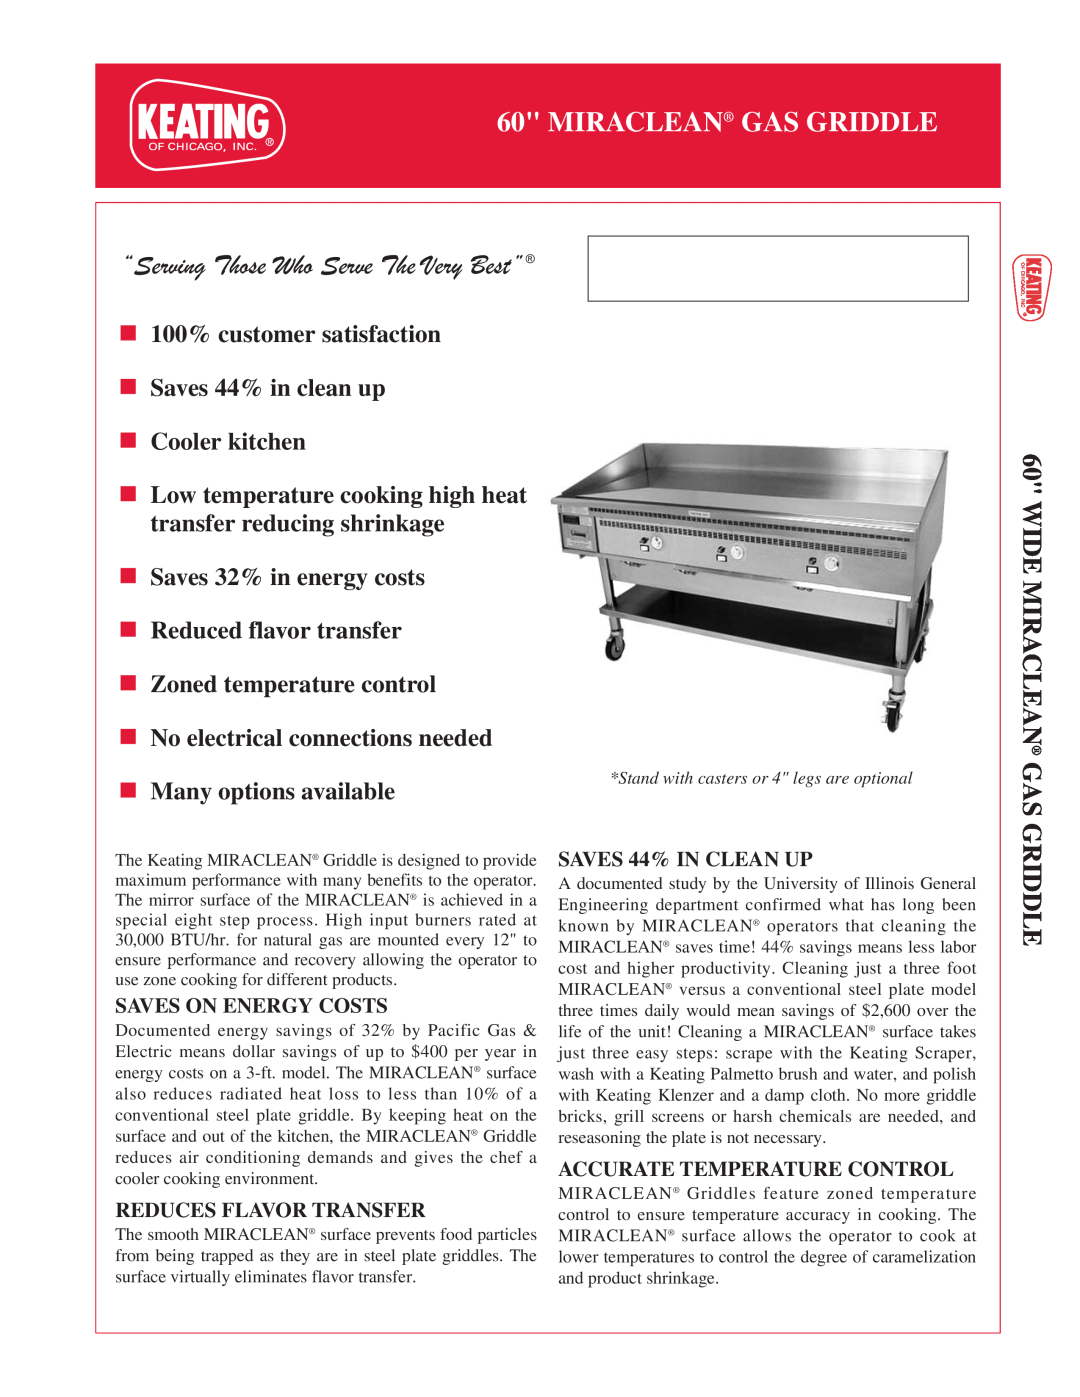 Keating Of Chicago 6030 manual Wide Miraclean Gas Griddle, “Serving Those Who Serve The Very Best”, Cooler kitchen 